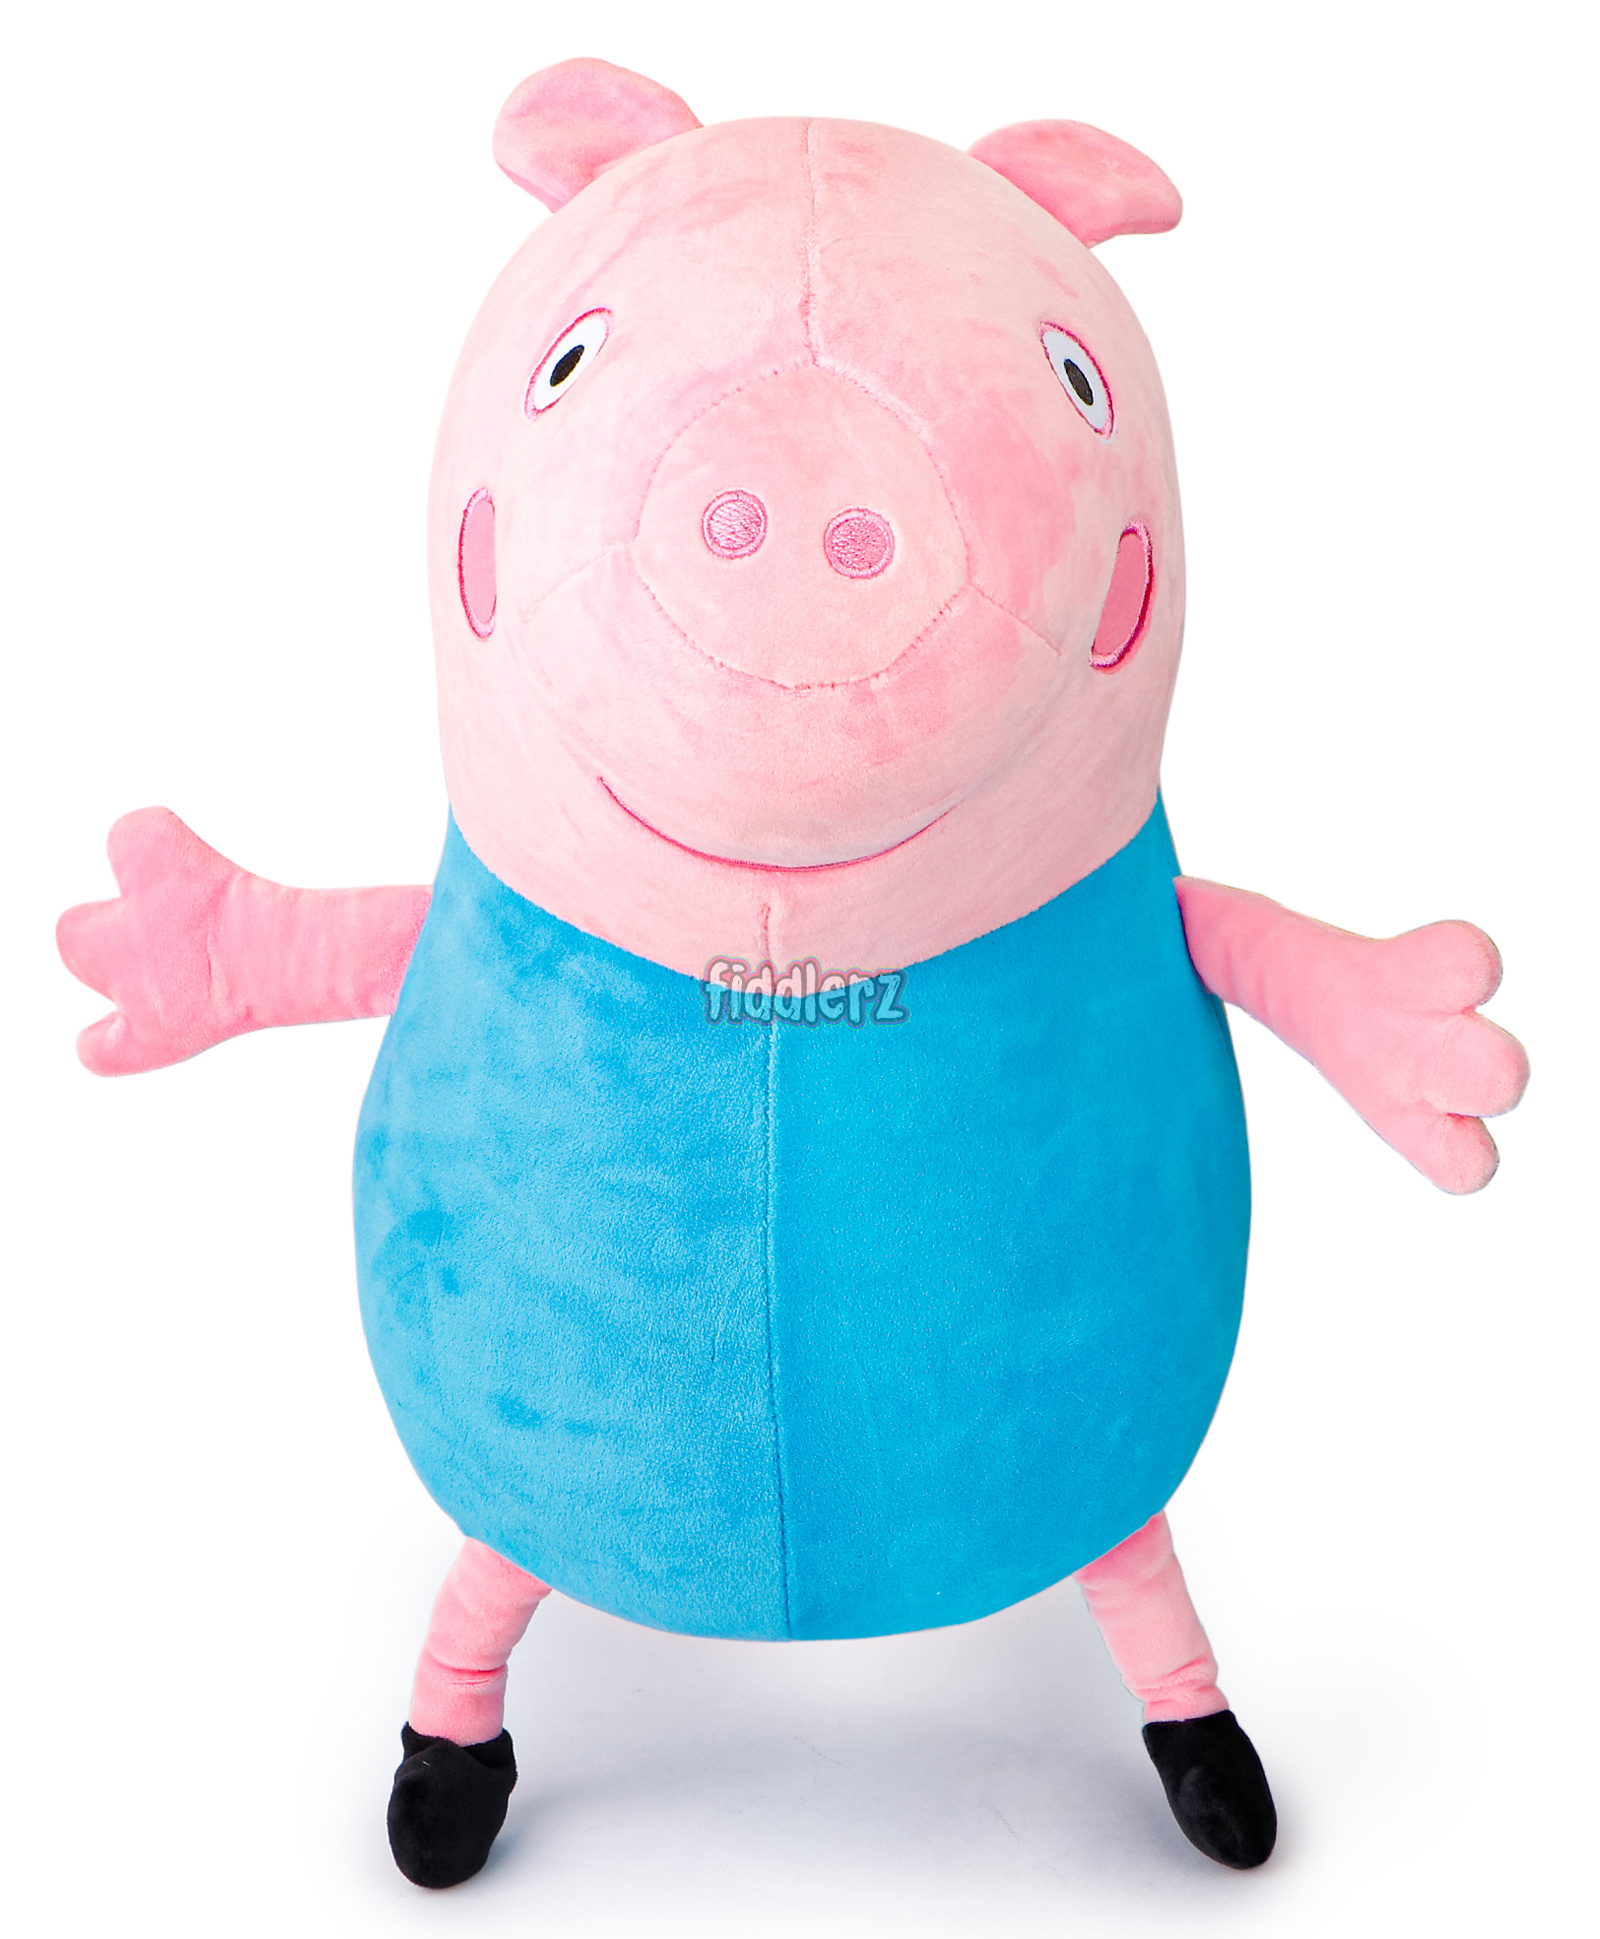 Fiddlerz Cartoon Soft Toy Multicolour - Height 45 cm Online India, Buy Soft  Toys for (3-6 Years) at  - 10704622